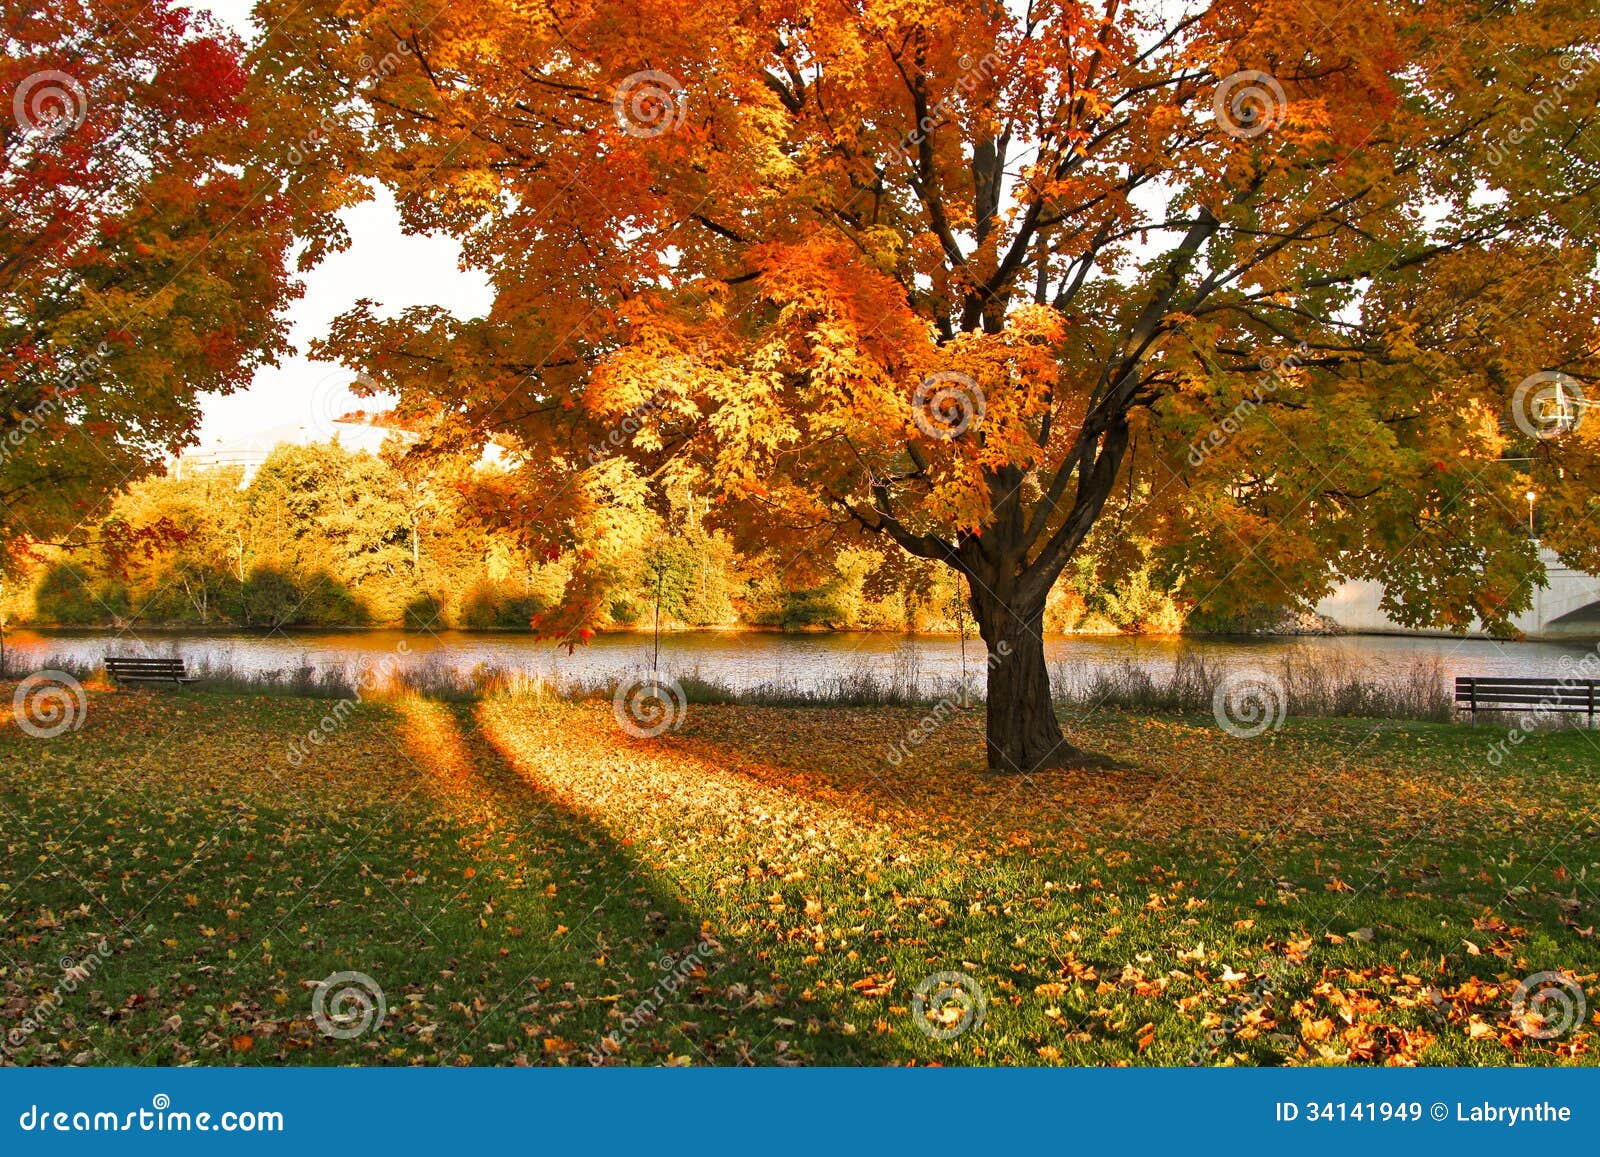  Autumn  Royalty Free Stock Images Image 34141949